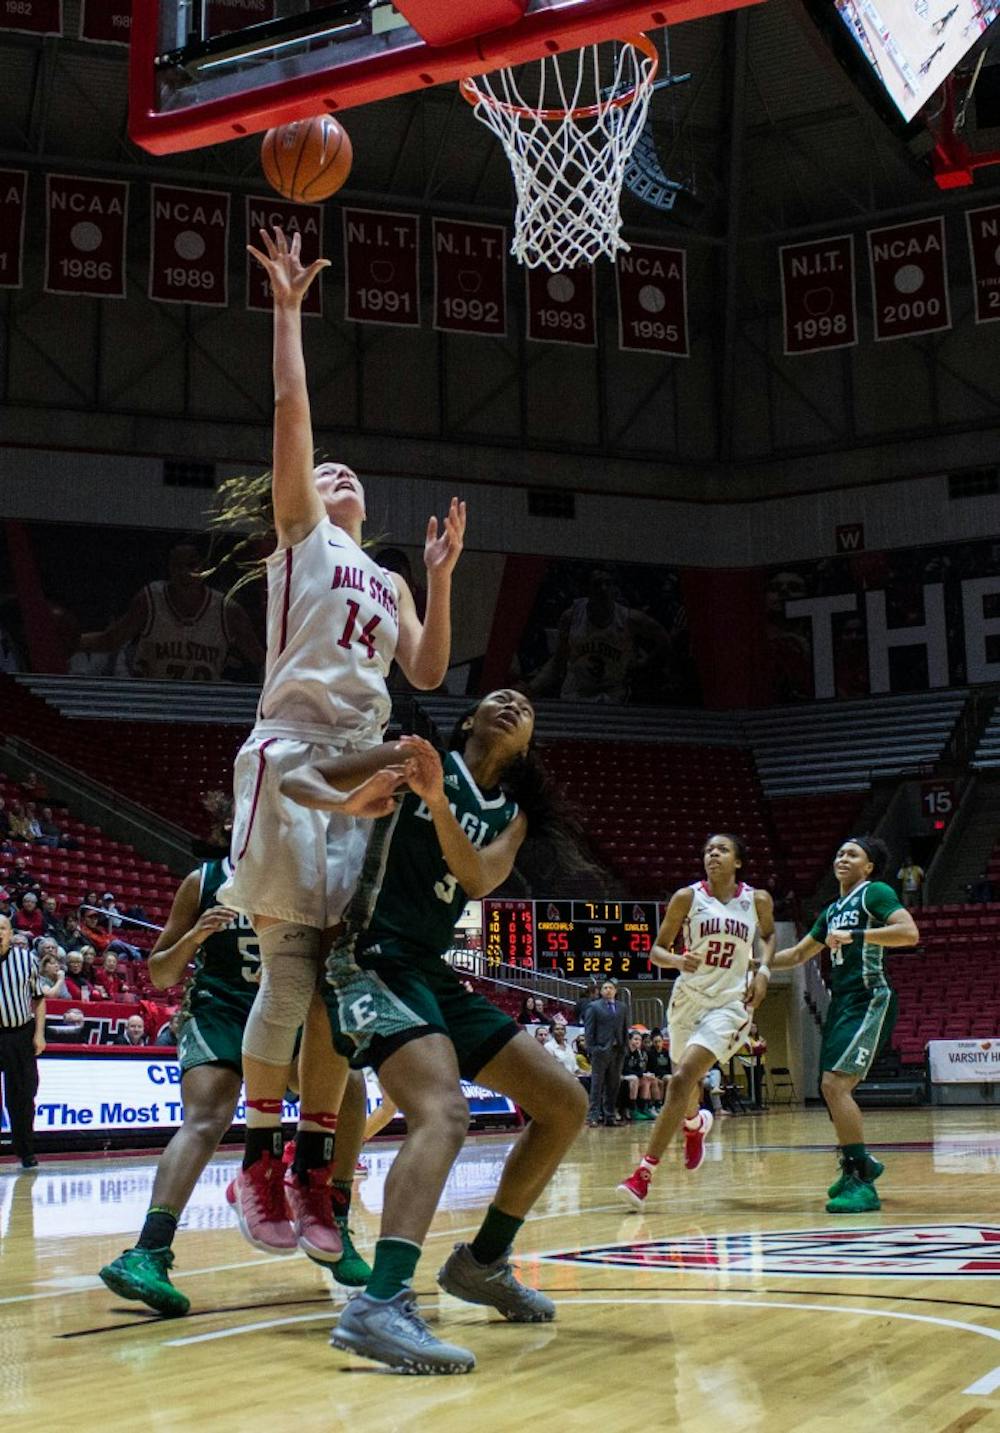 Ball State center Renee Bennett shoots a layup during the game against Eastern Michigan on Jan. 18 in Worthen Arena. The Cardinals won 78-49. Grace Ramey // DN